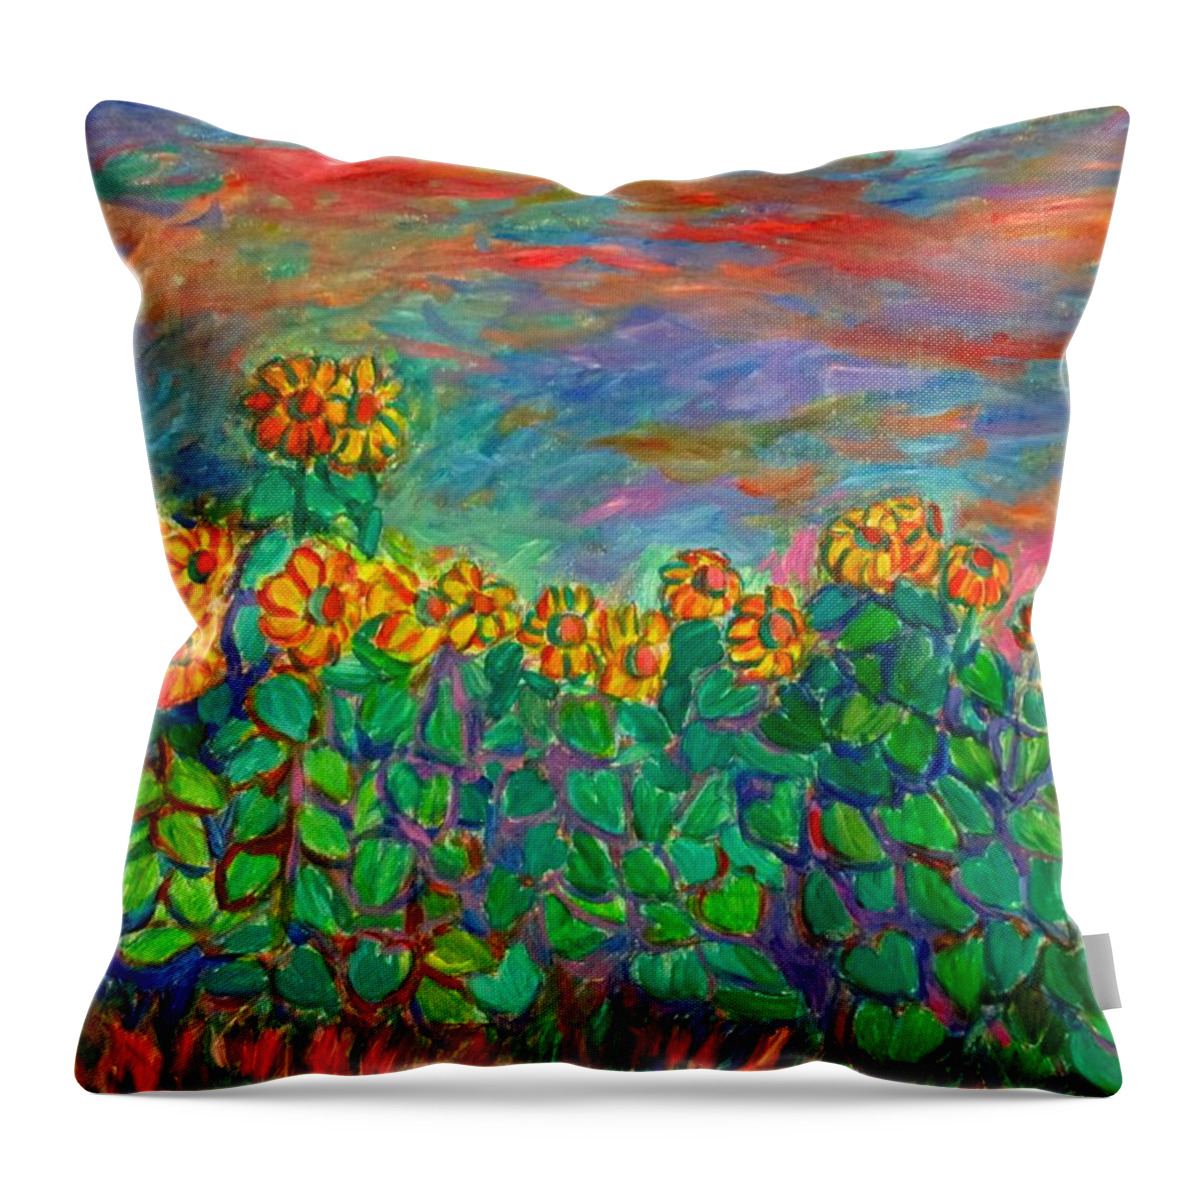 Sunflowers Throw Pillow featuring the painting Sunflower Frenzy by Kendall Kessler